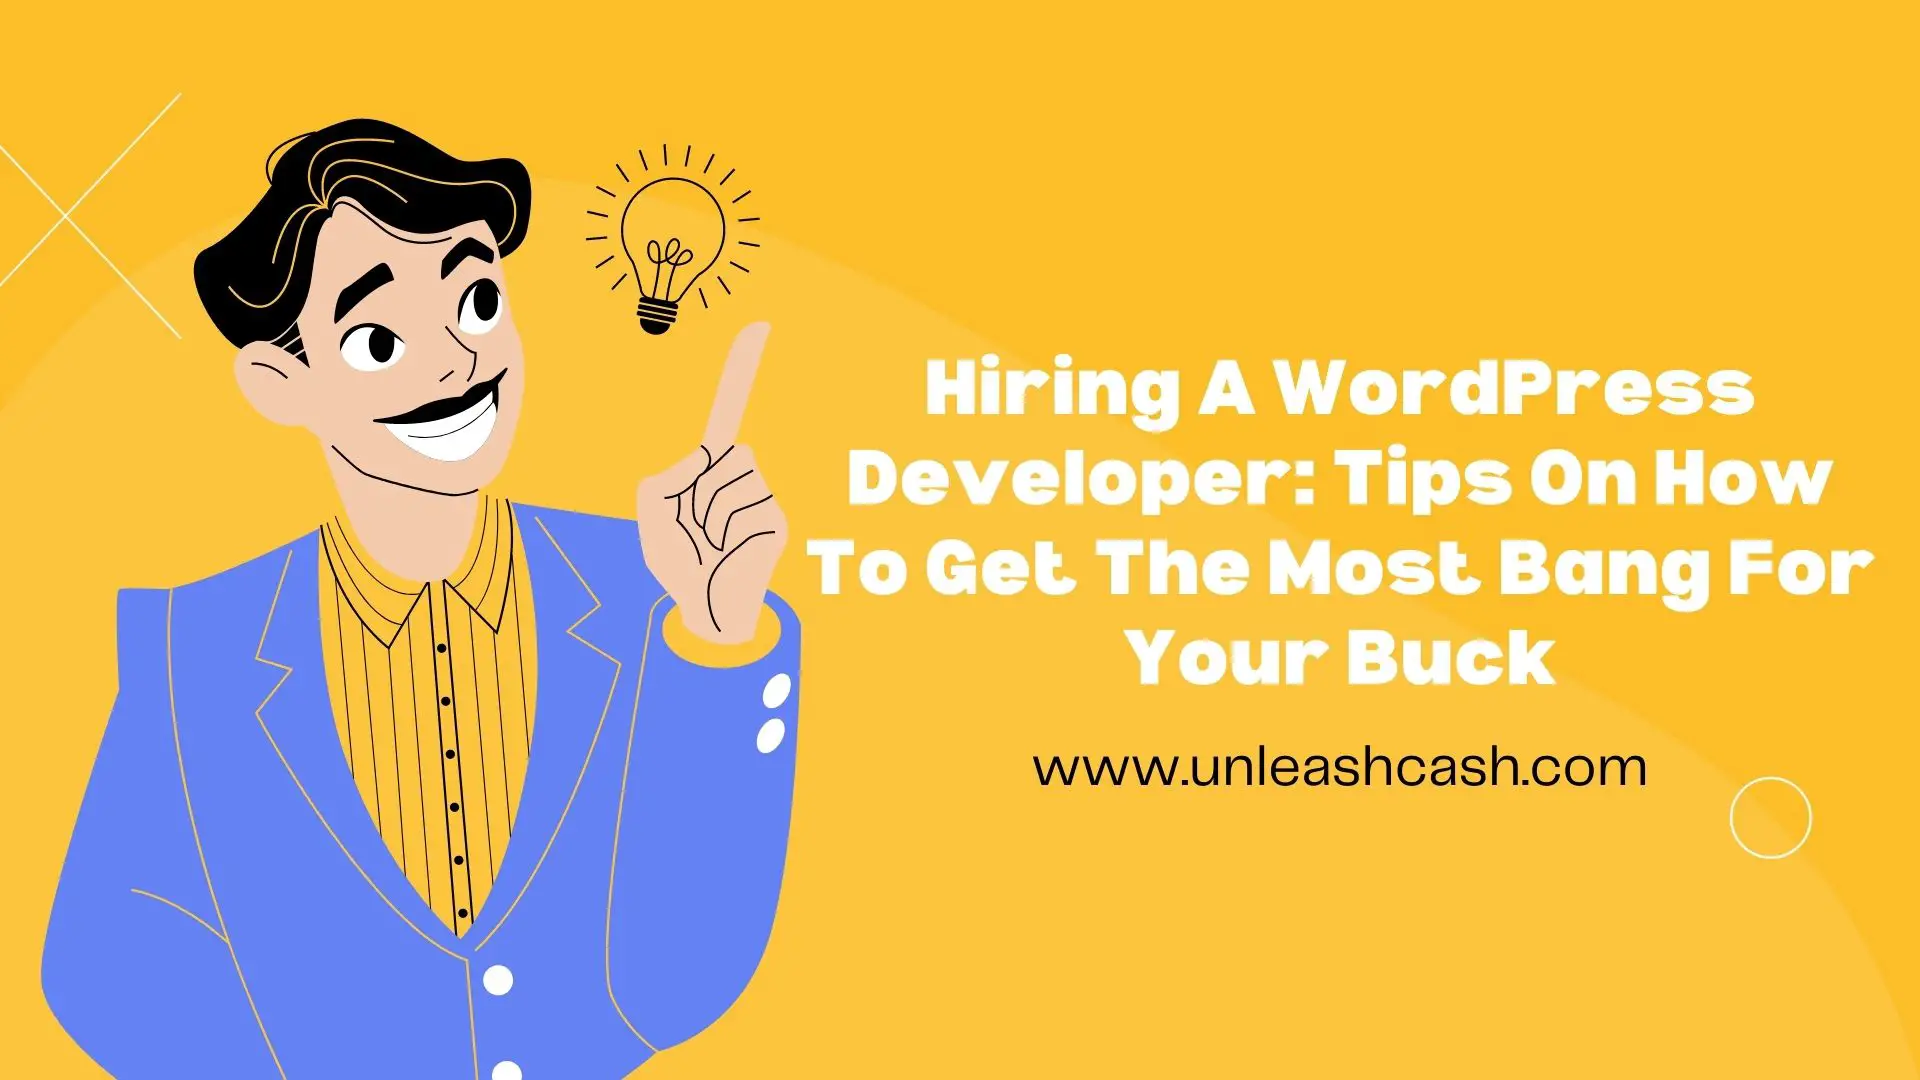 Hiring A WordPress Developer: Tips On How To Get The Most Bang For Your Buck